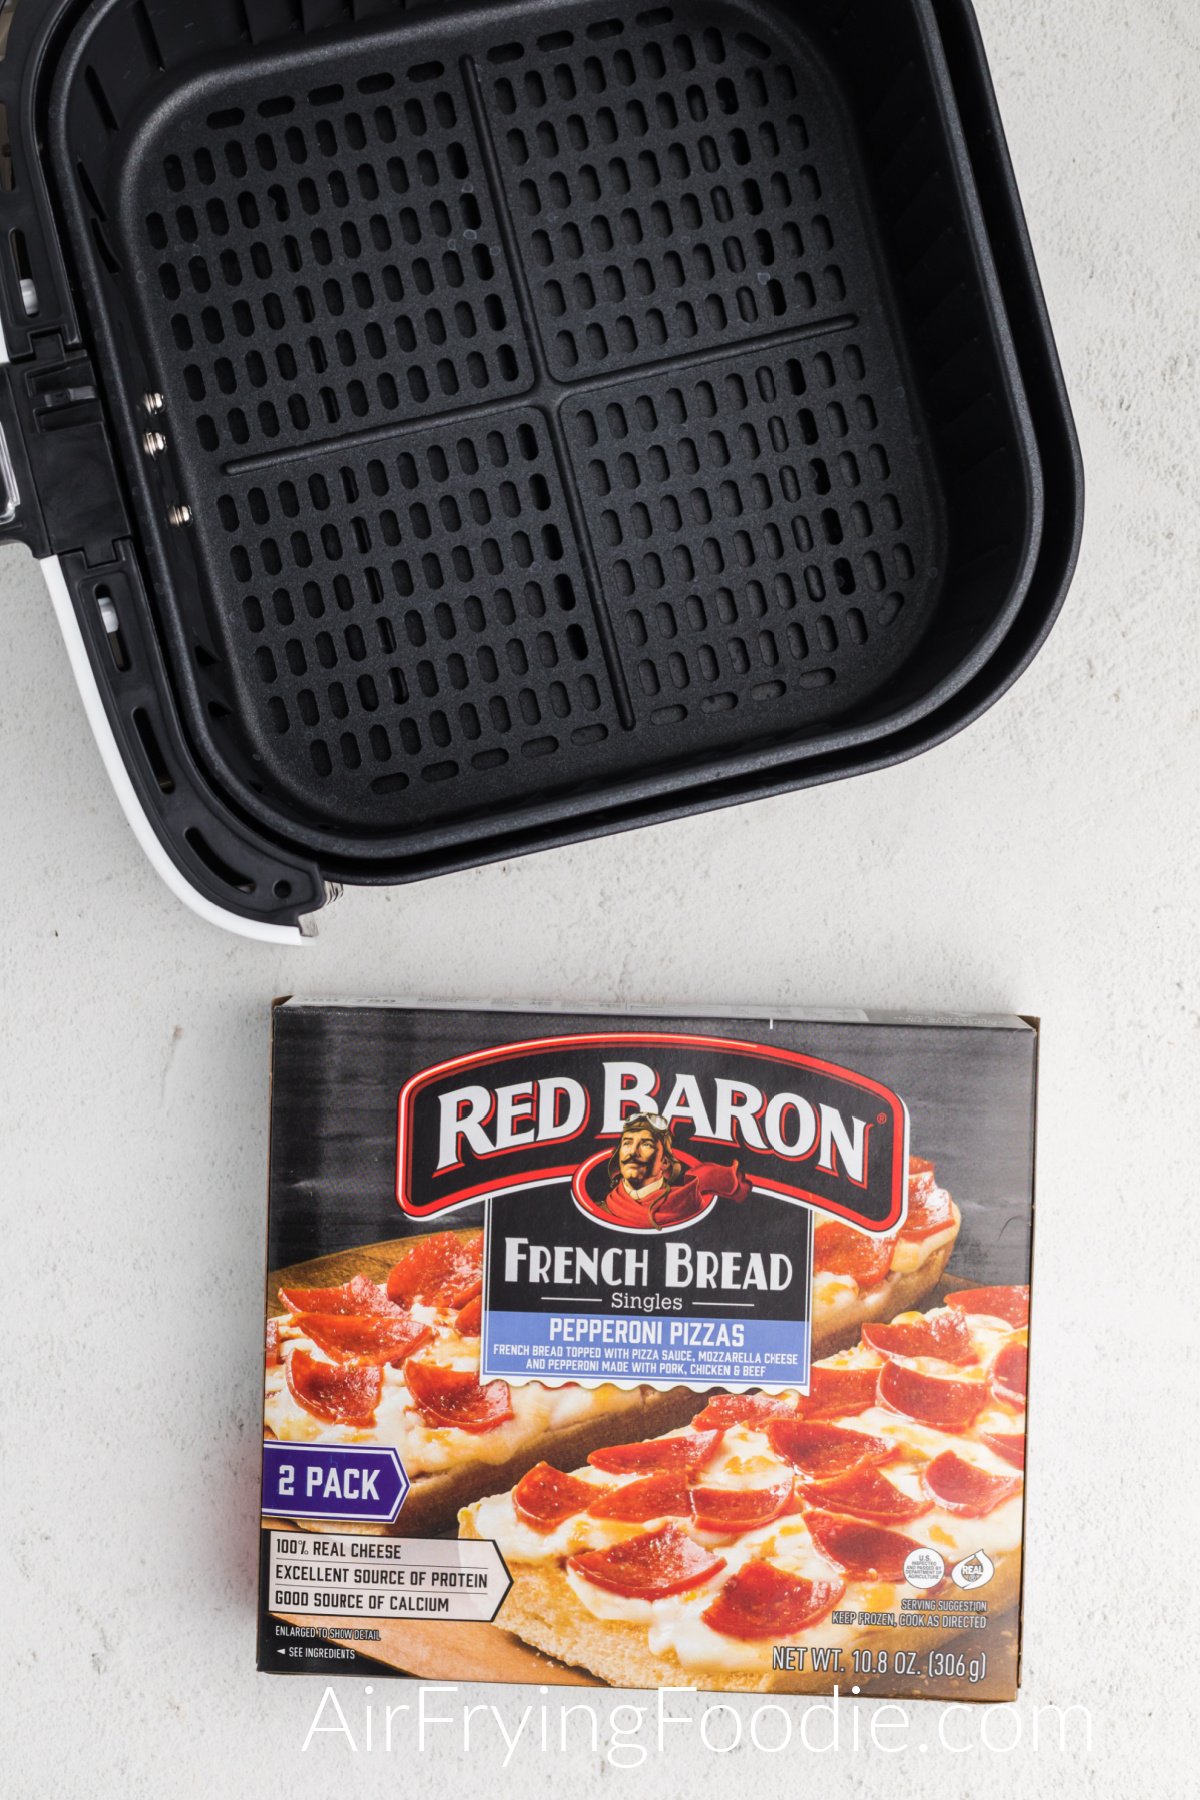 Air fryer basket and frozen french bread pizzas in a box. 